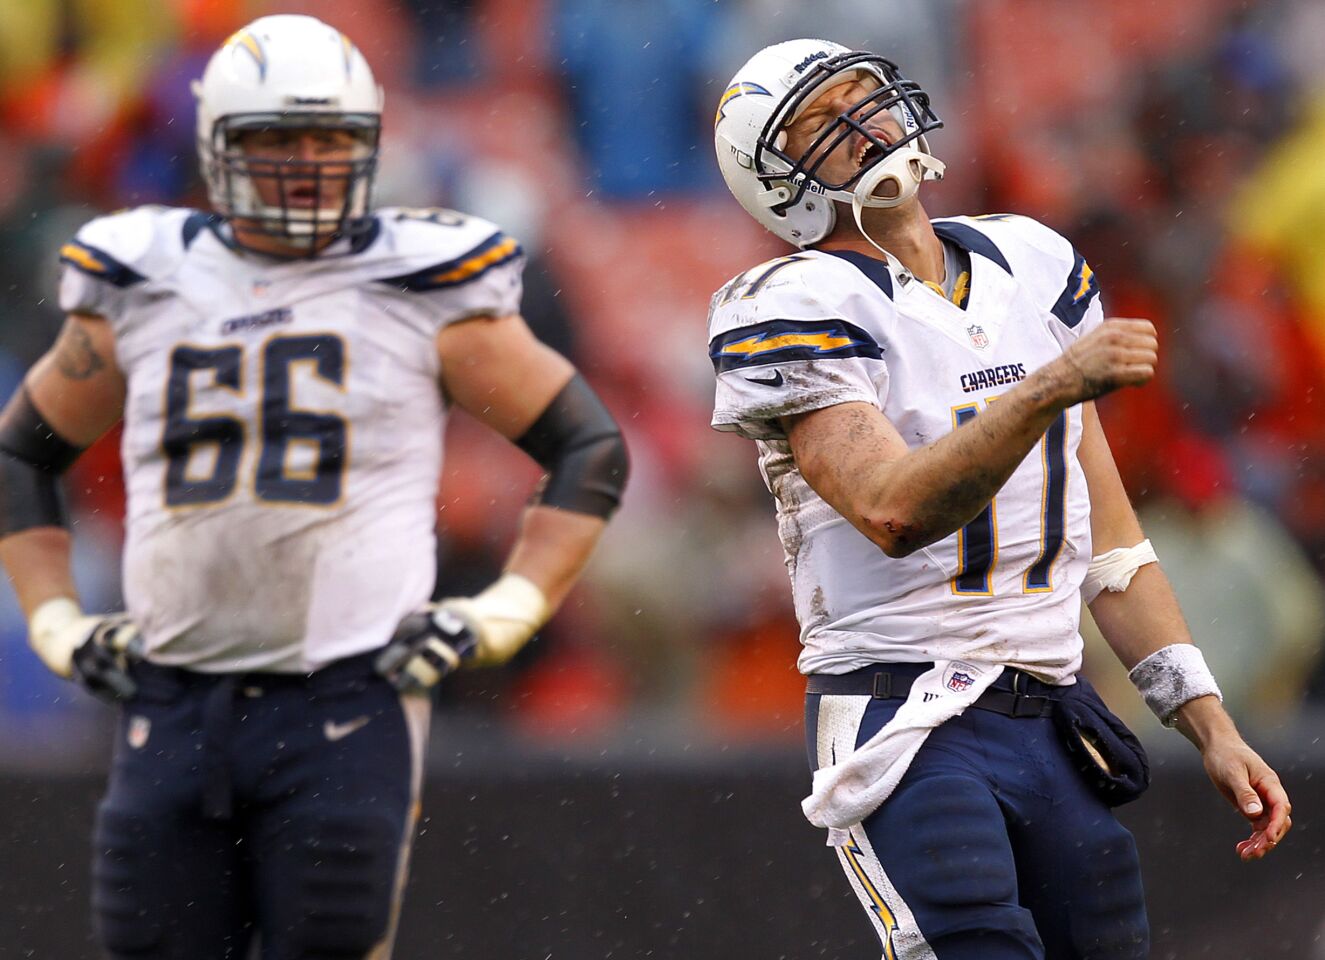 Chargers Philip Rivers couldn't convert a 4th down play on the final drive against the Browns in Cleveland on Sunday, Oct. 28, 2012. The Browns won 7-6.